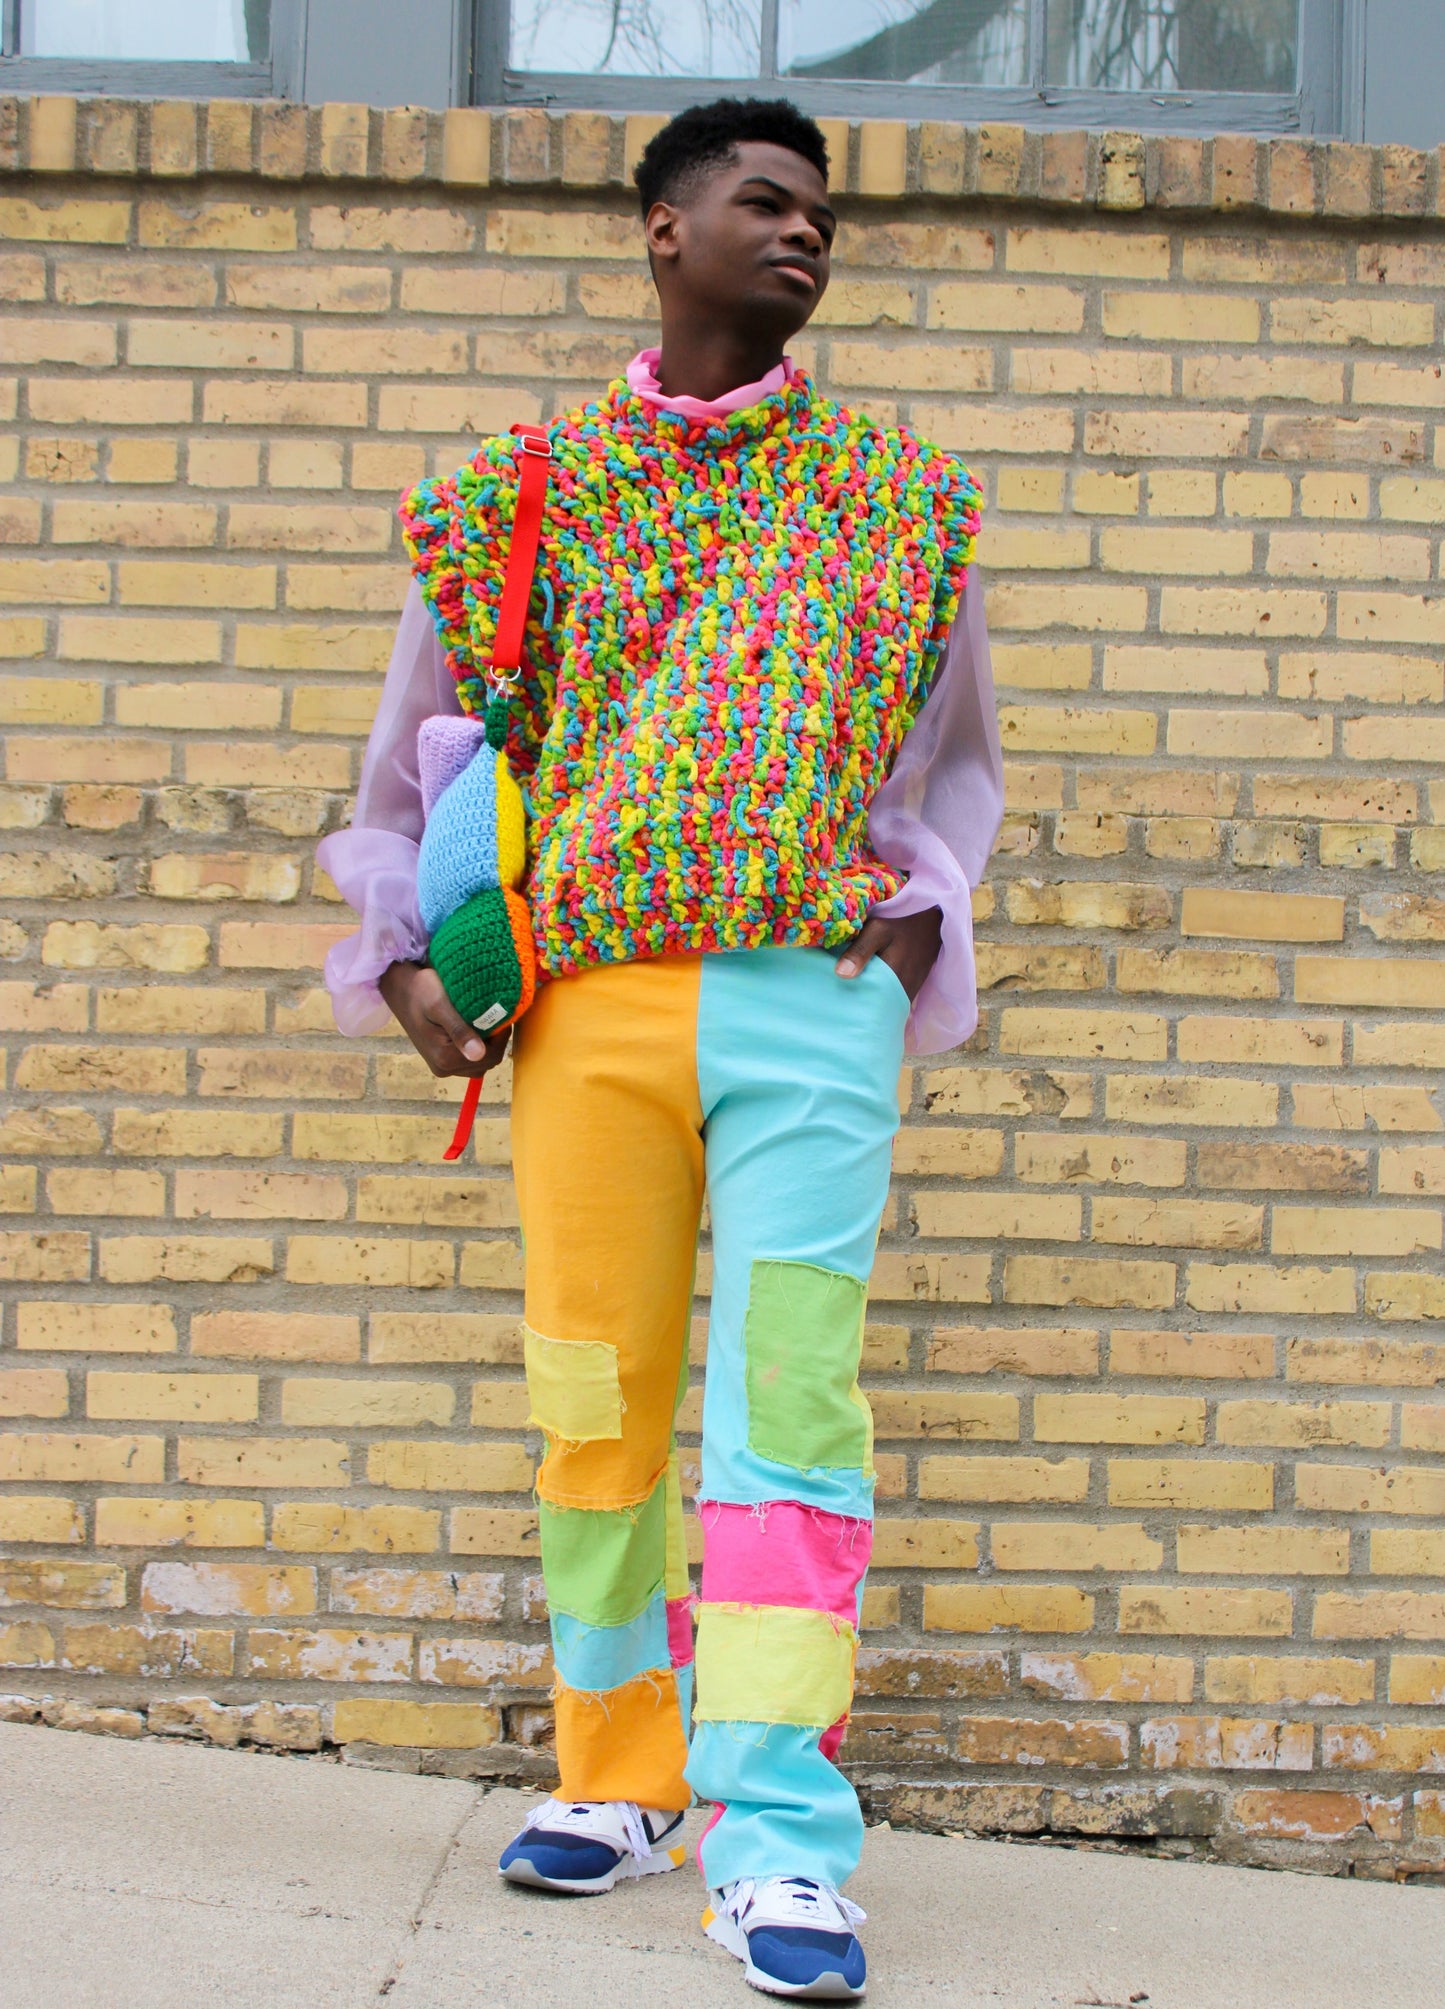 “ Cereal” Oversized Crocheted Shirt